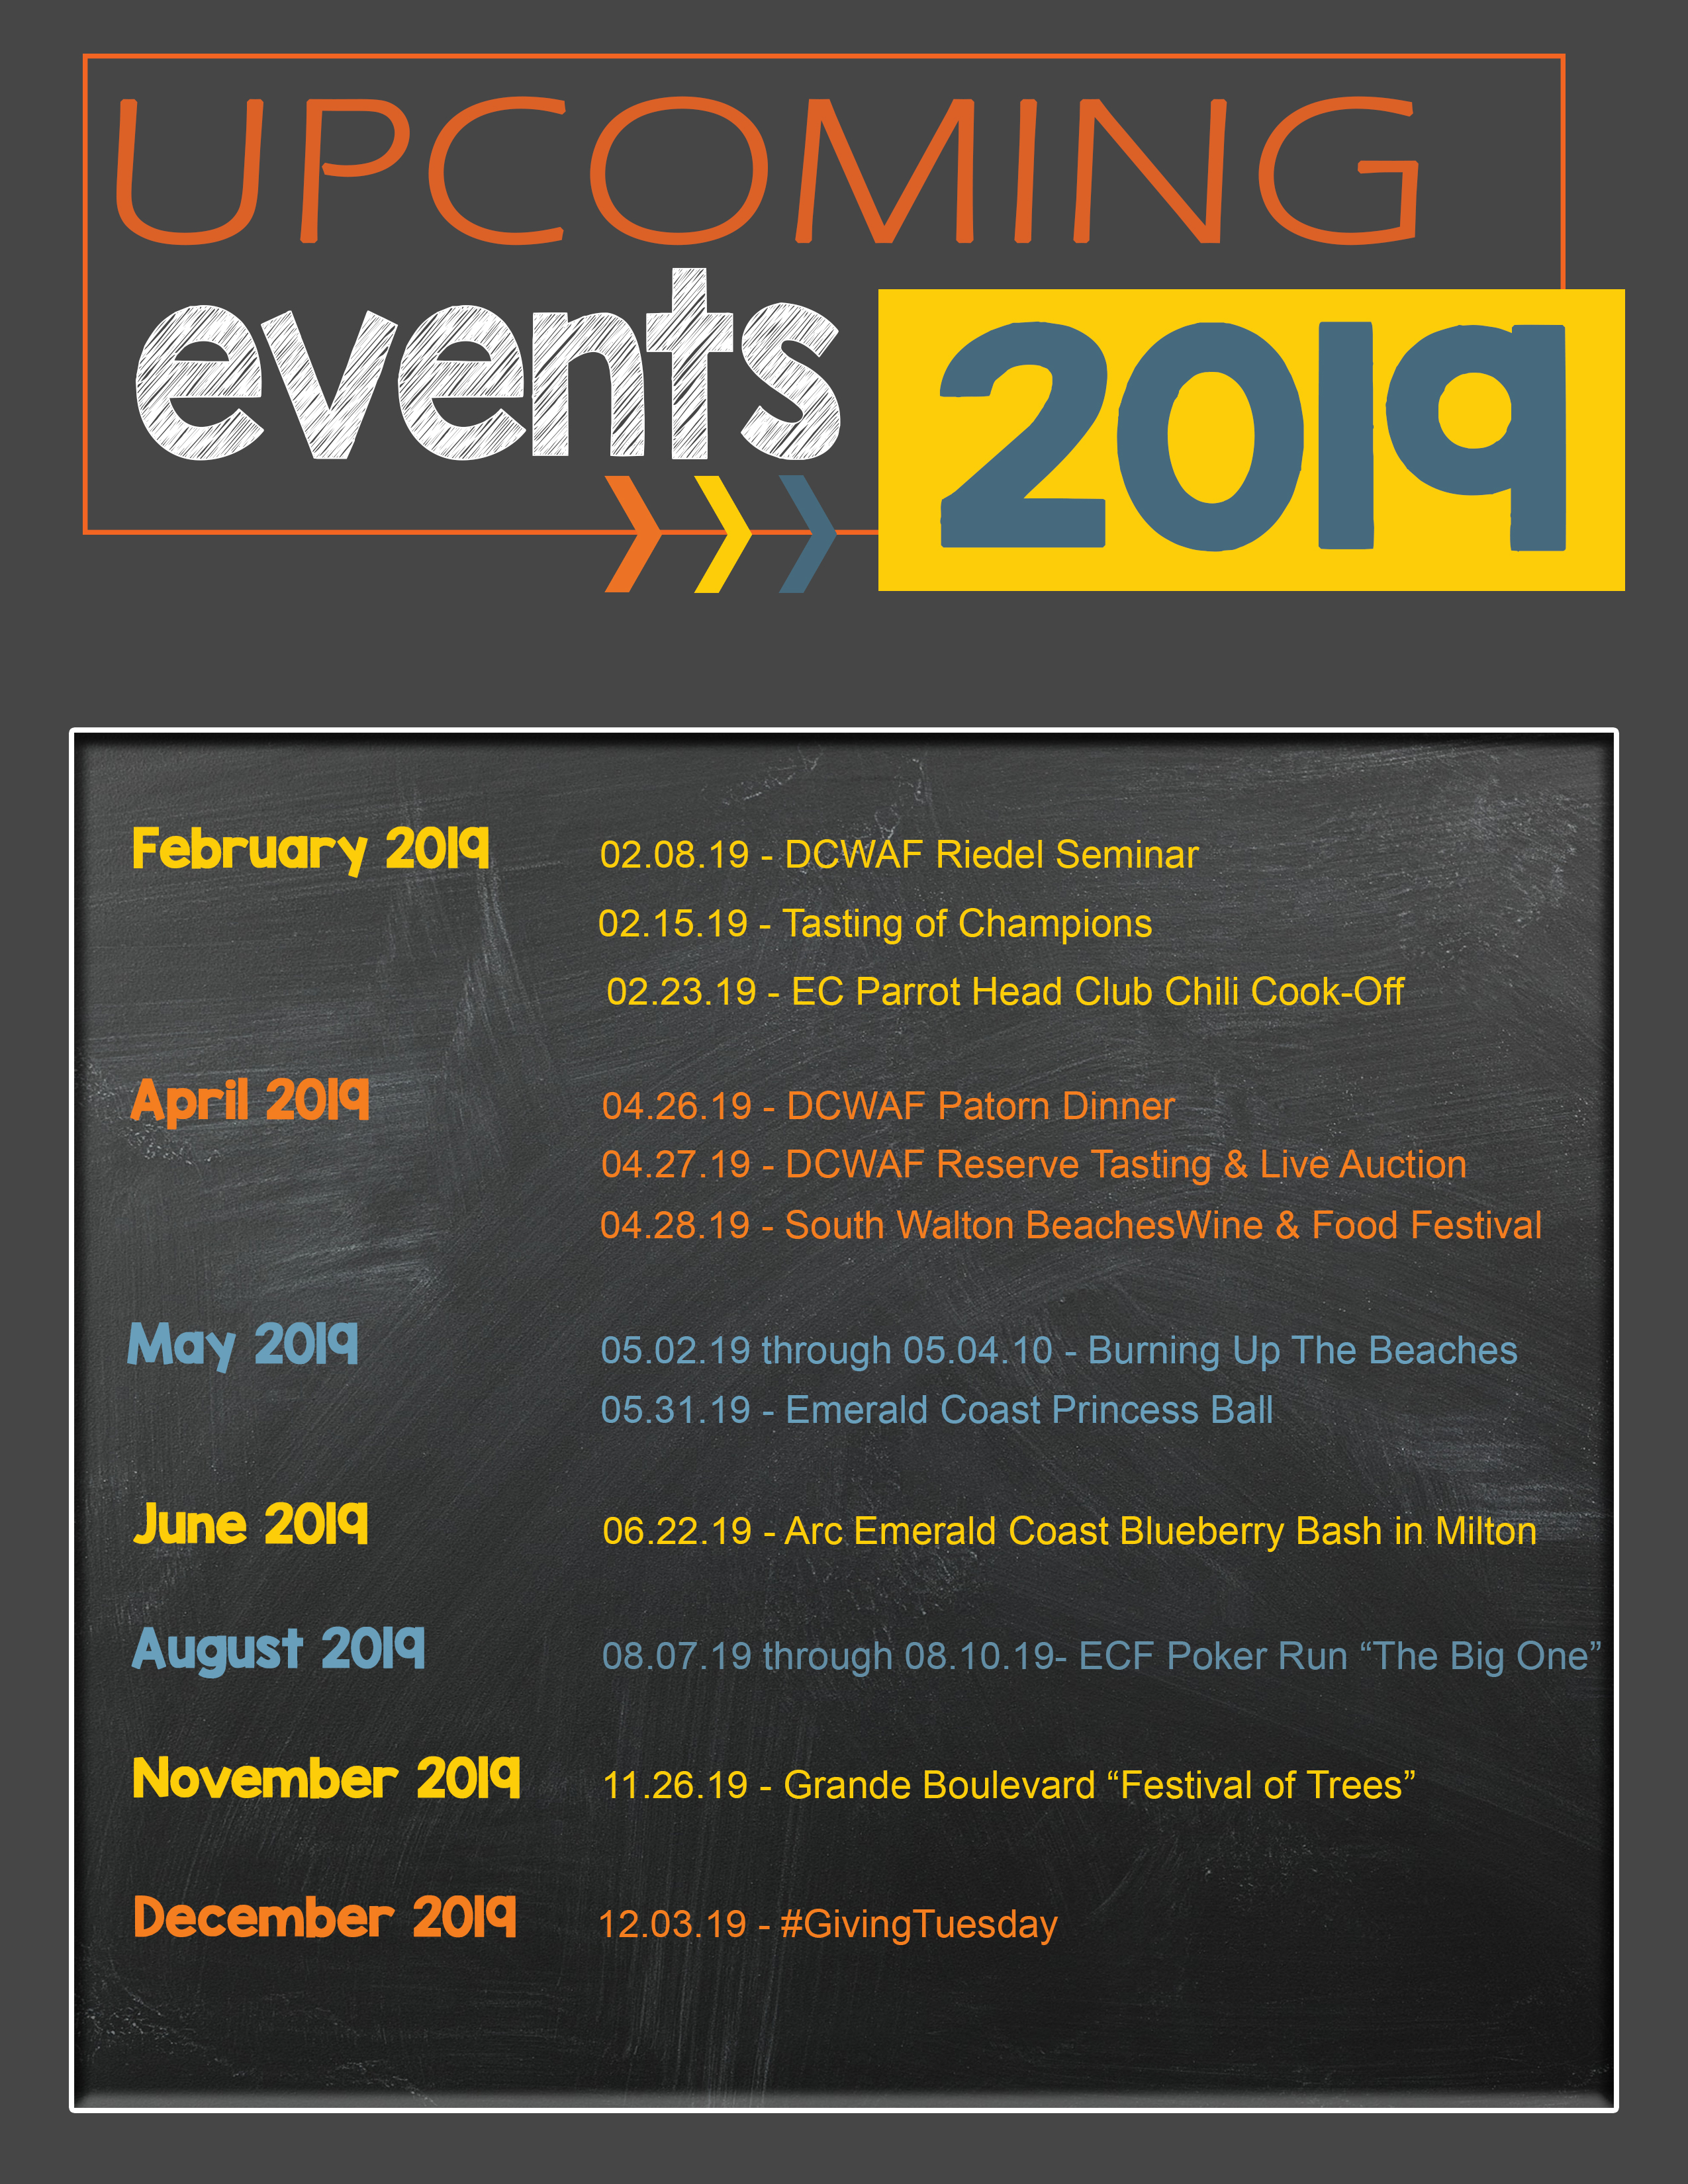 Upcoming events sheet The Arc of the Emerald Coast